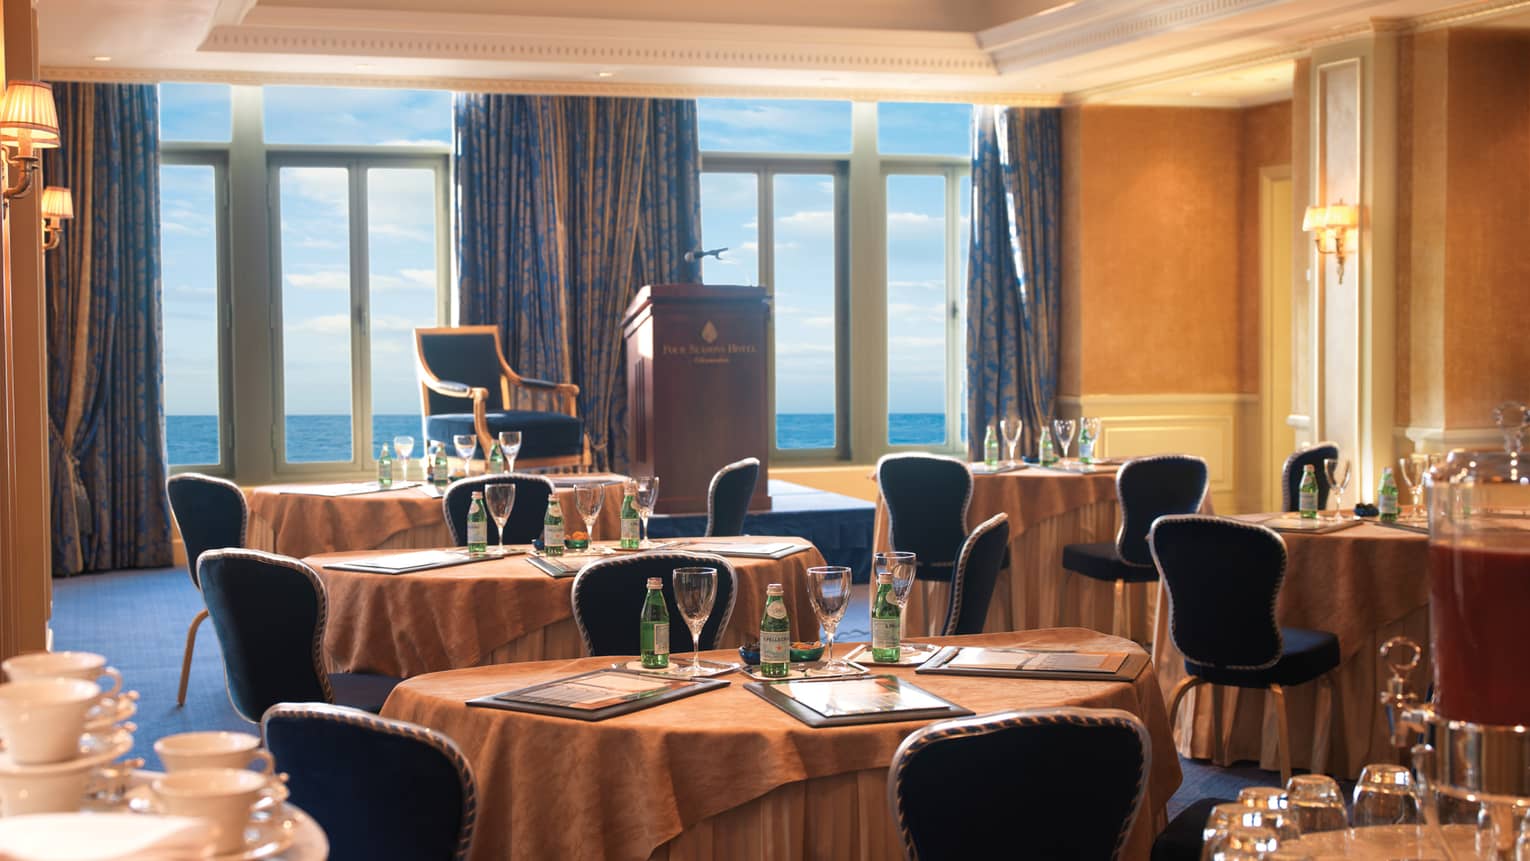 Sun-lit meeting room with round tables, royal blue chairs, podium facing floor-to-ceiling window and ocean views 